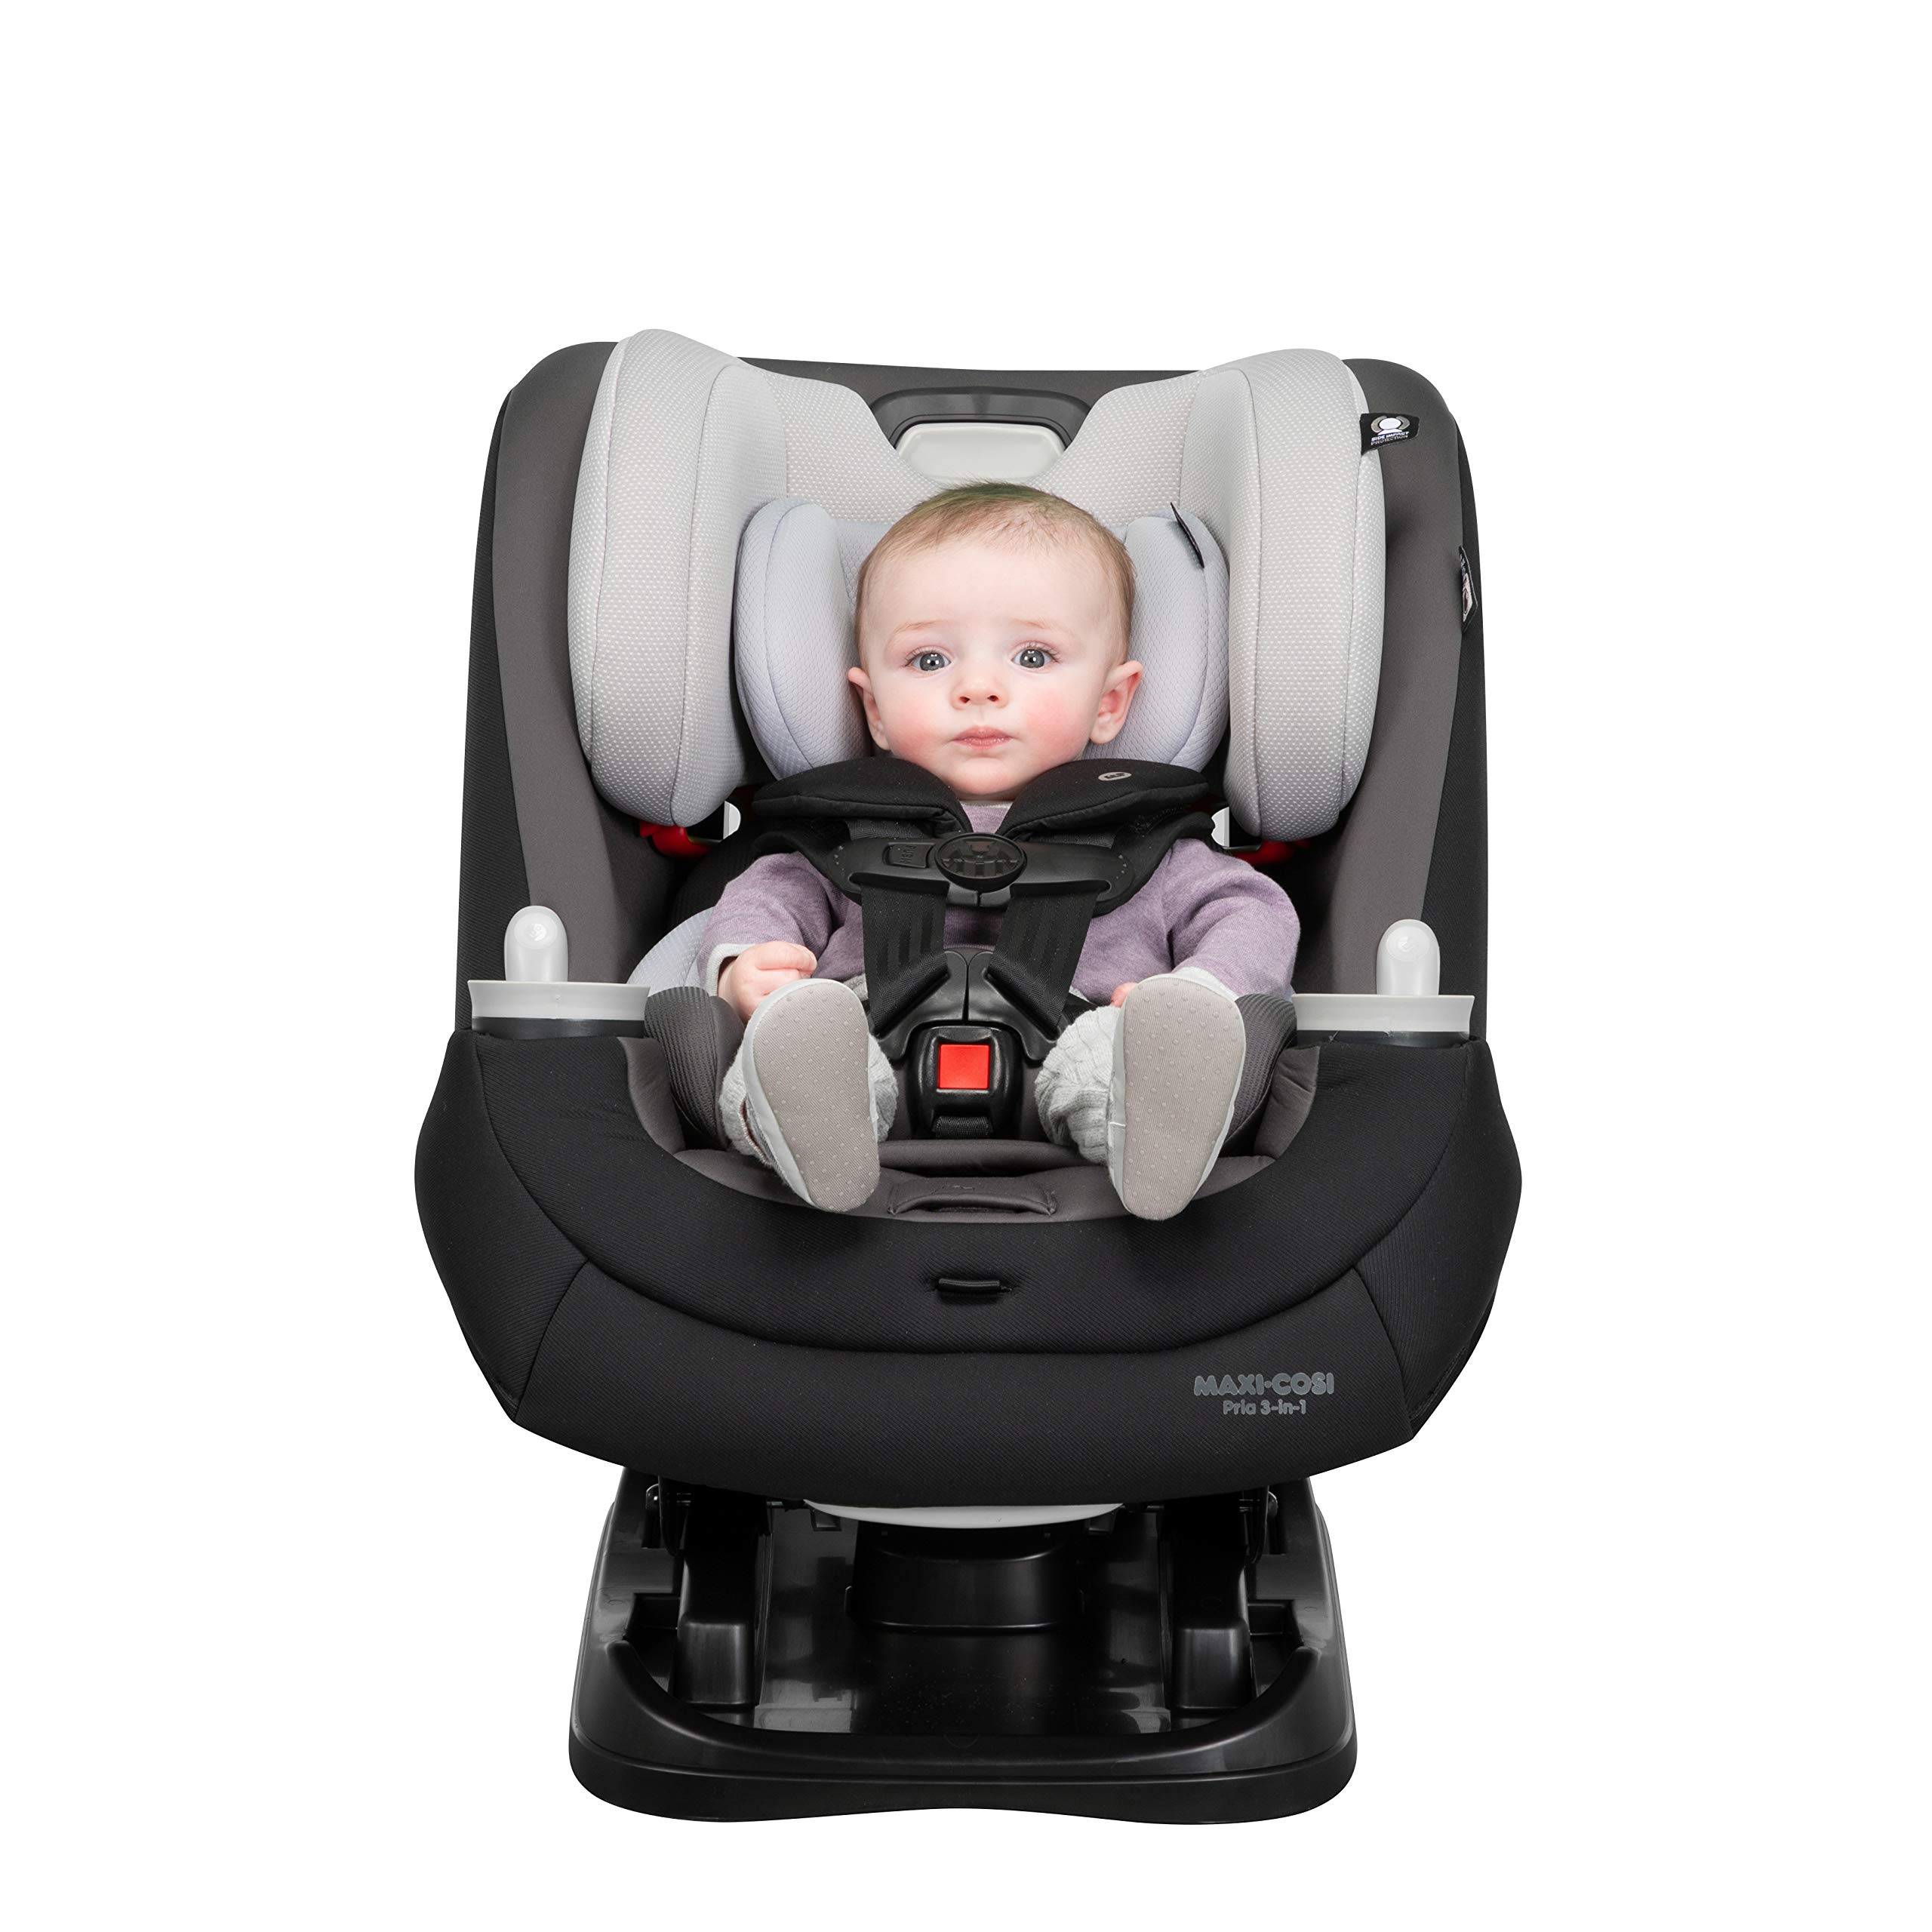 Maxi-Cosi Pria All-in-One Convertible Car Seat, rear-facing, from 4-40 pounds; forward-facing to 65 pounds; and up to 100 pounds in booster mode, Blackened Pearl